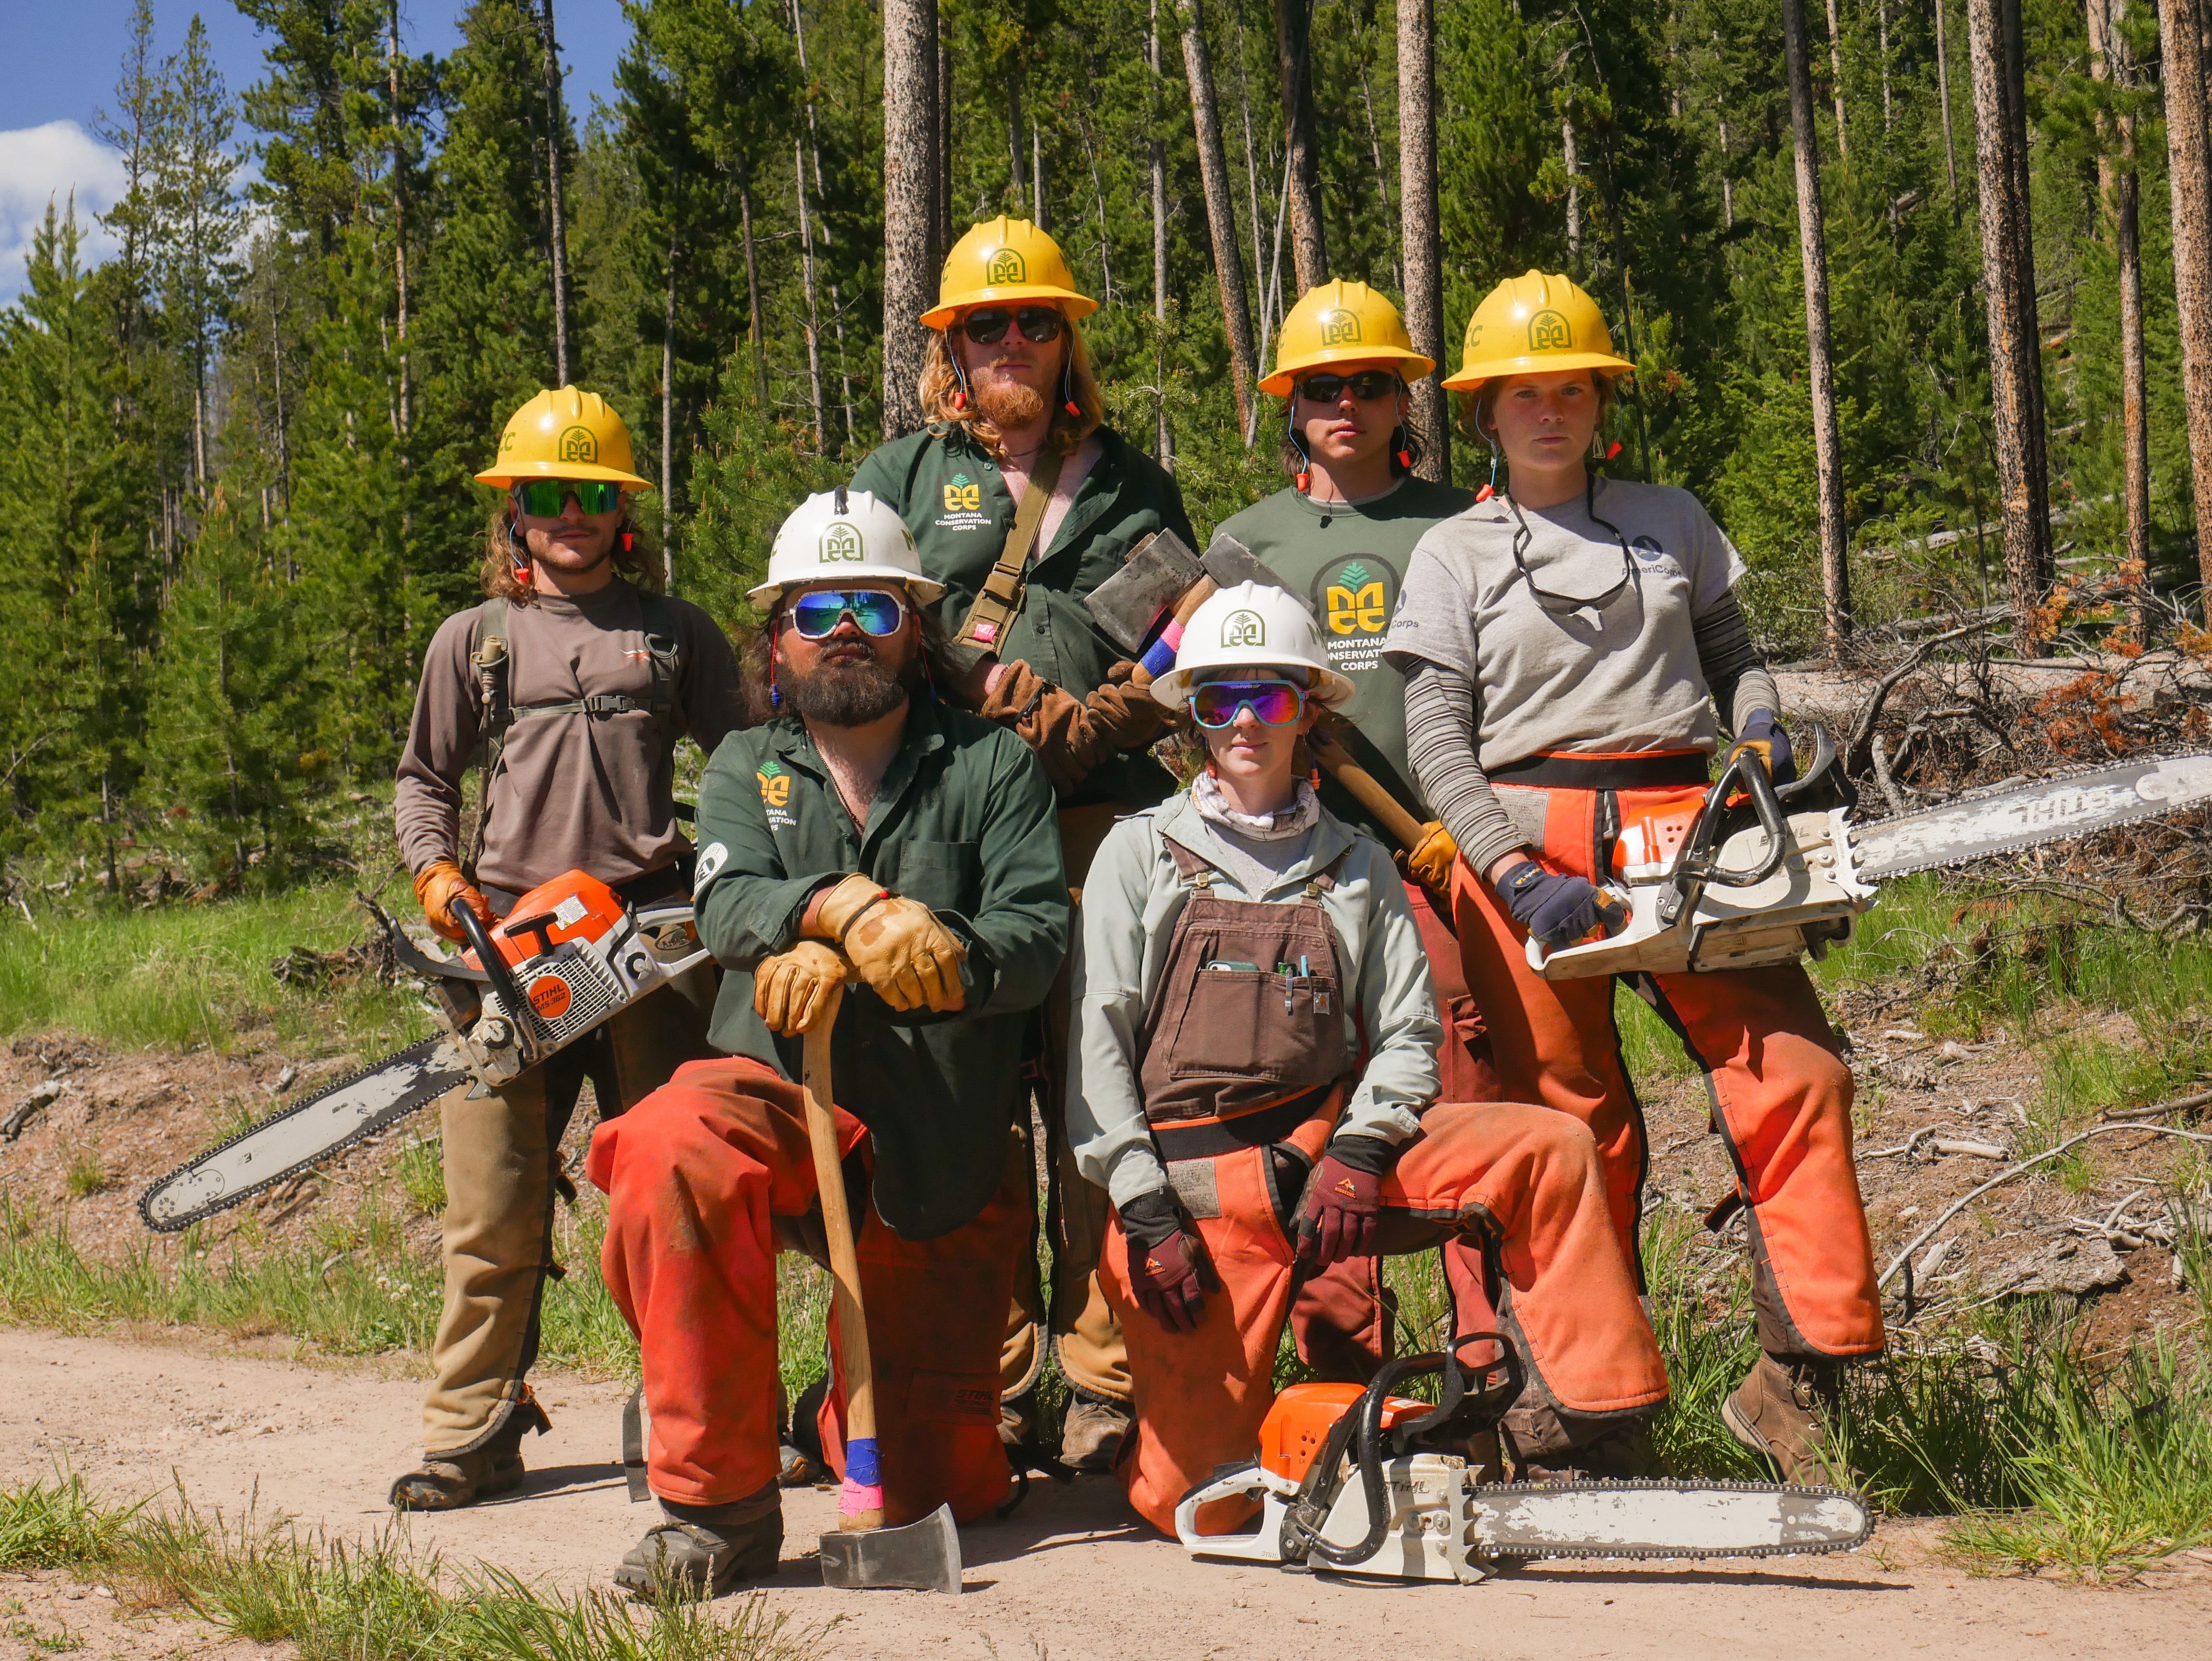 A crew wearing chaps and chainsaws, stands posing with serious faces.